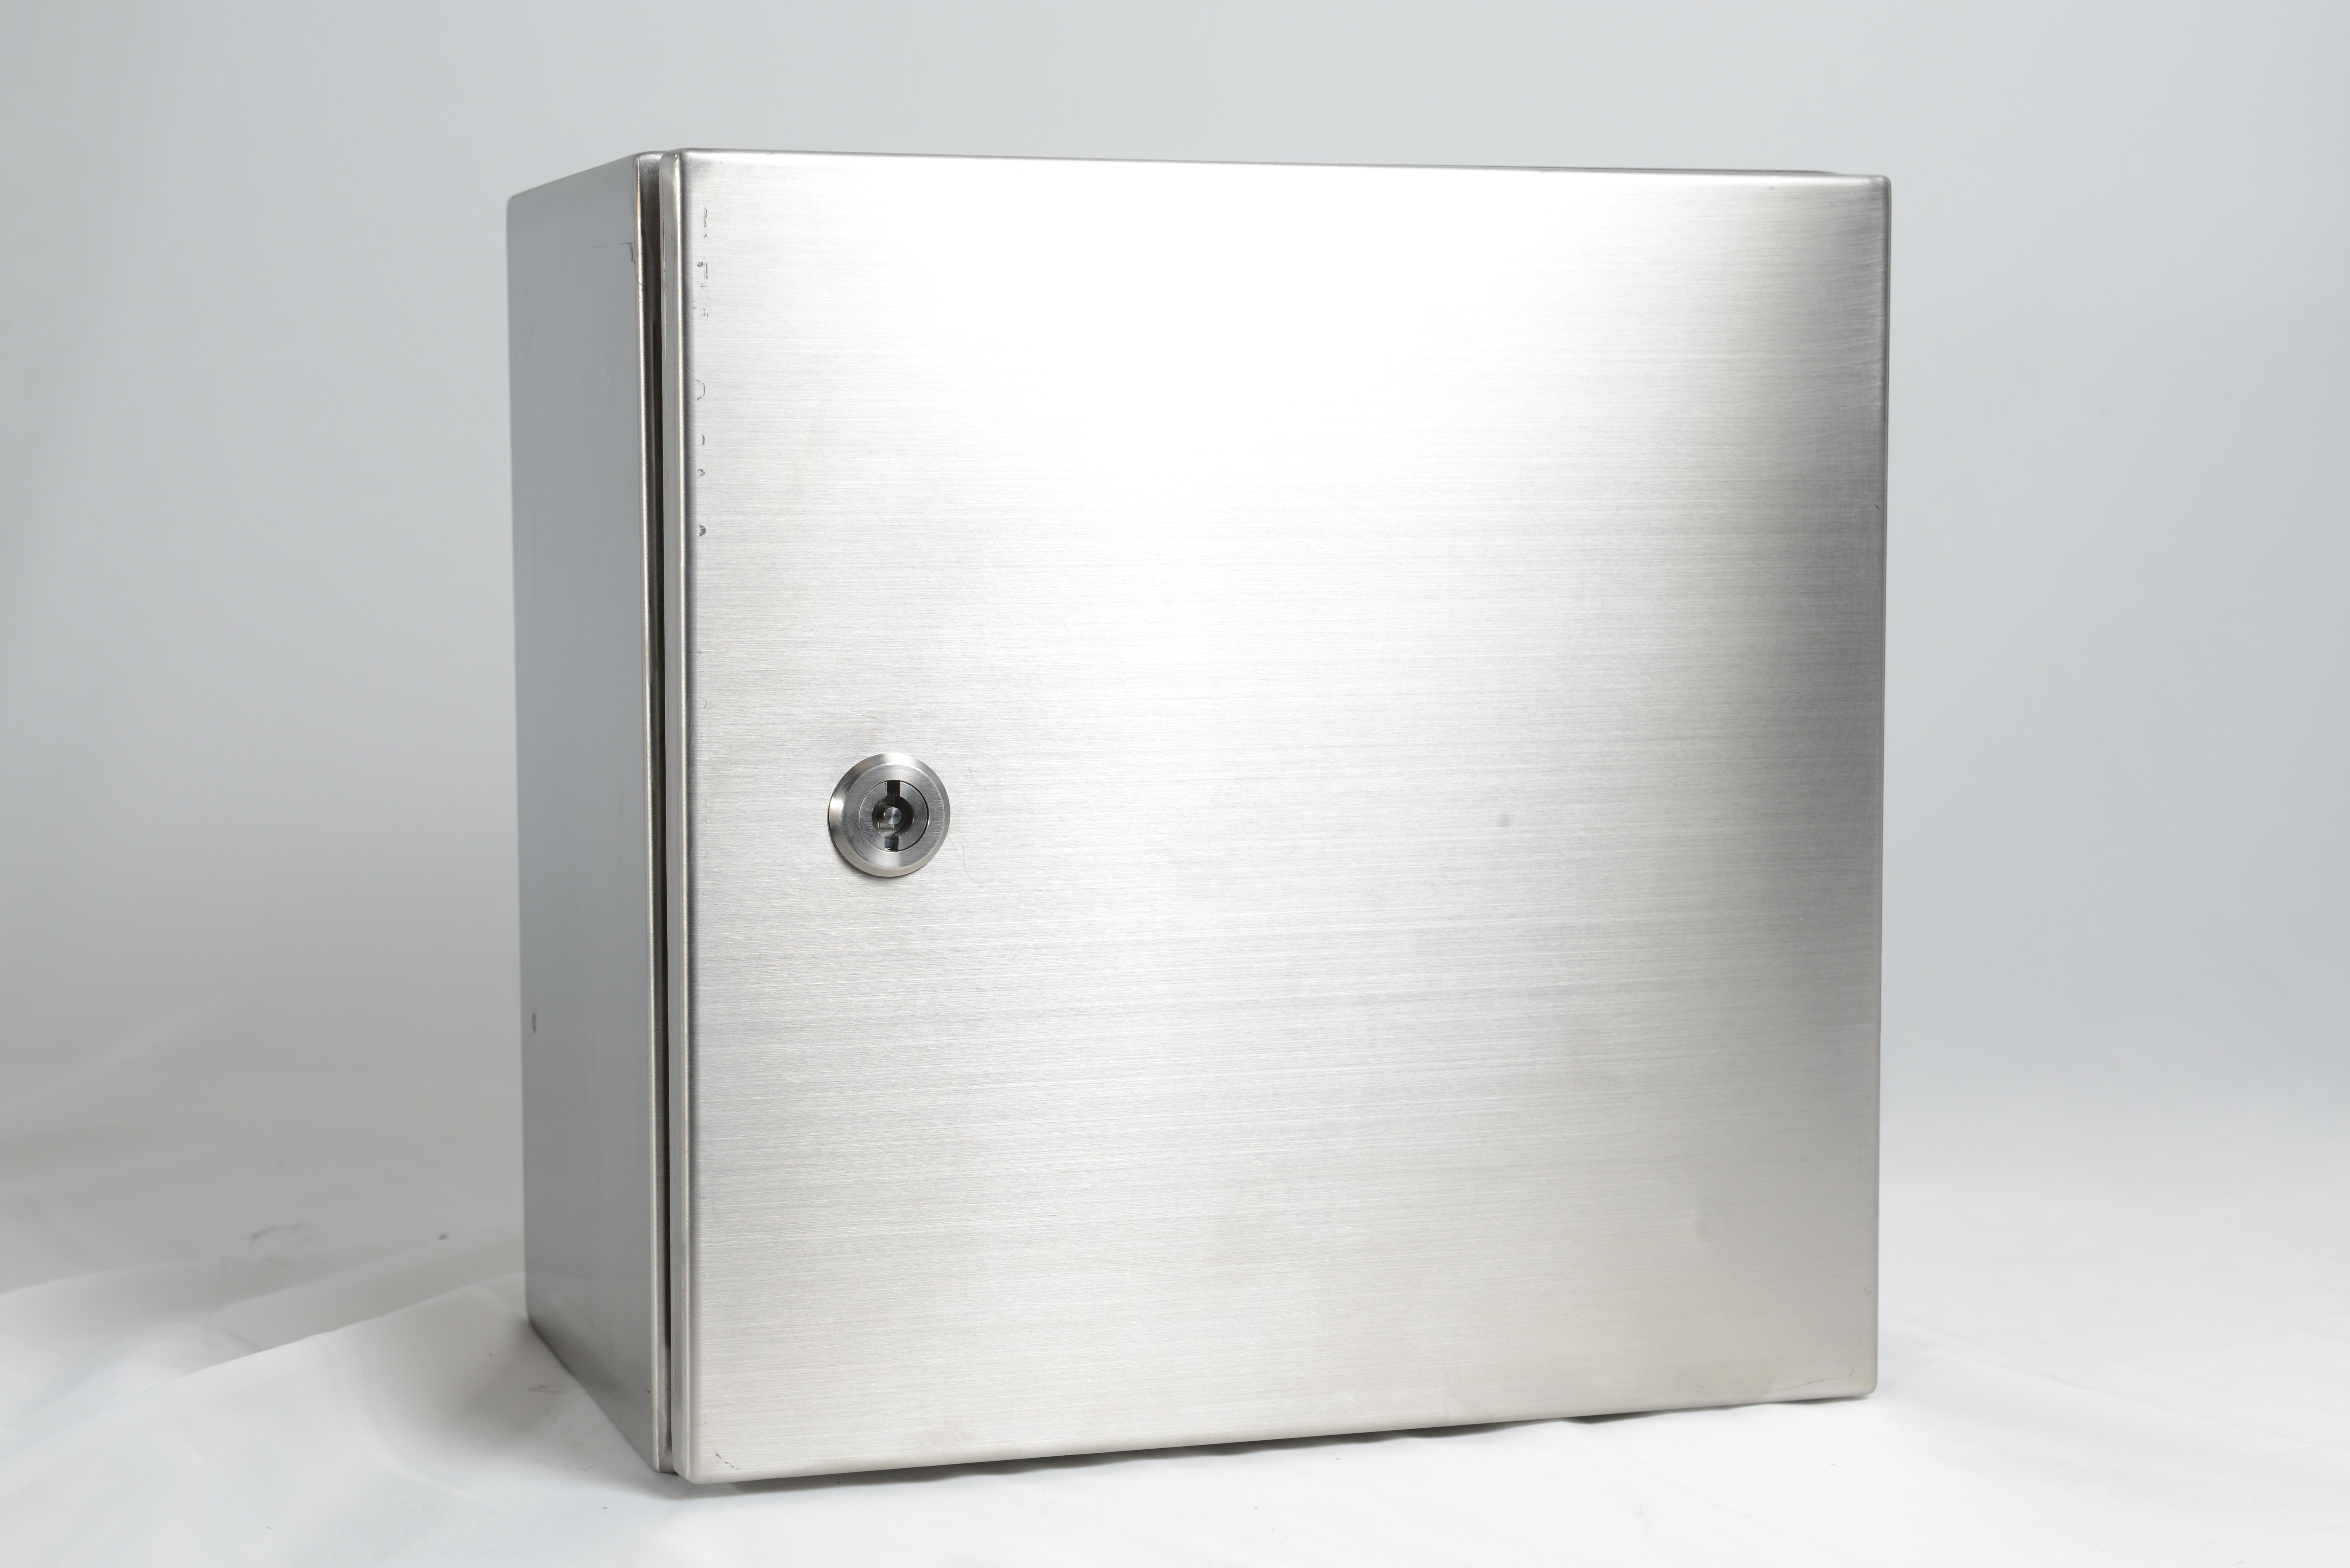 RCG stainless steel enclosure 316 grade 400x400x250mm - wall mounting